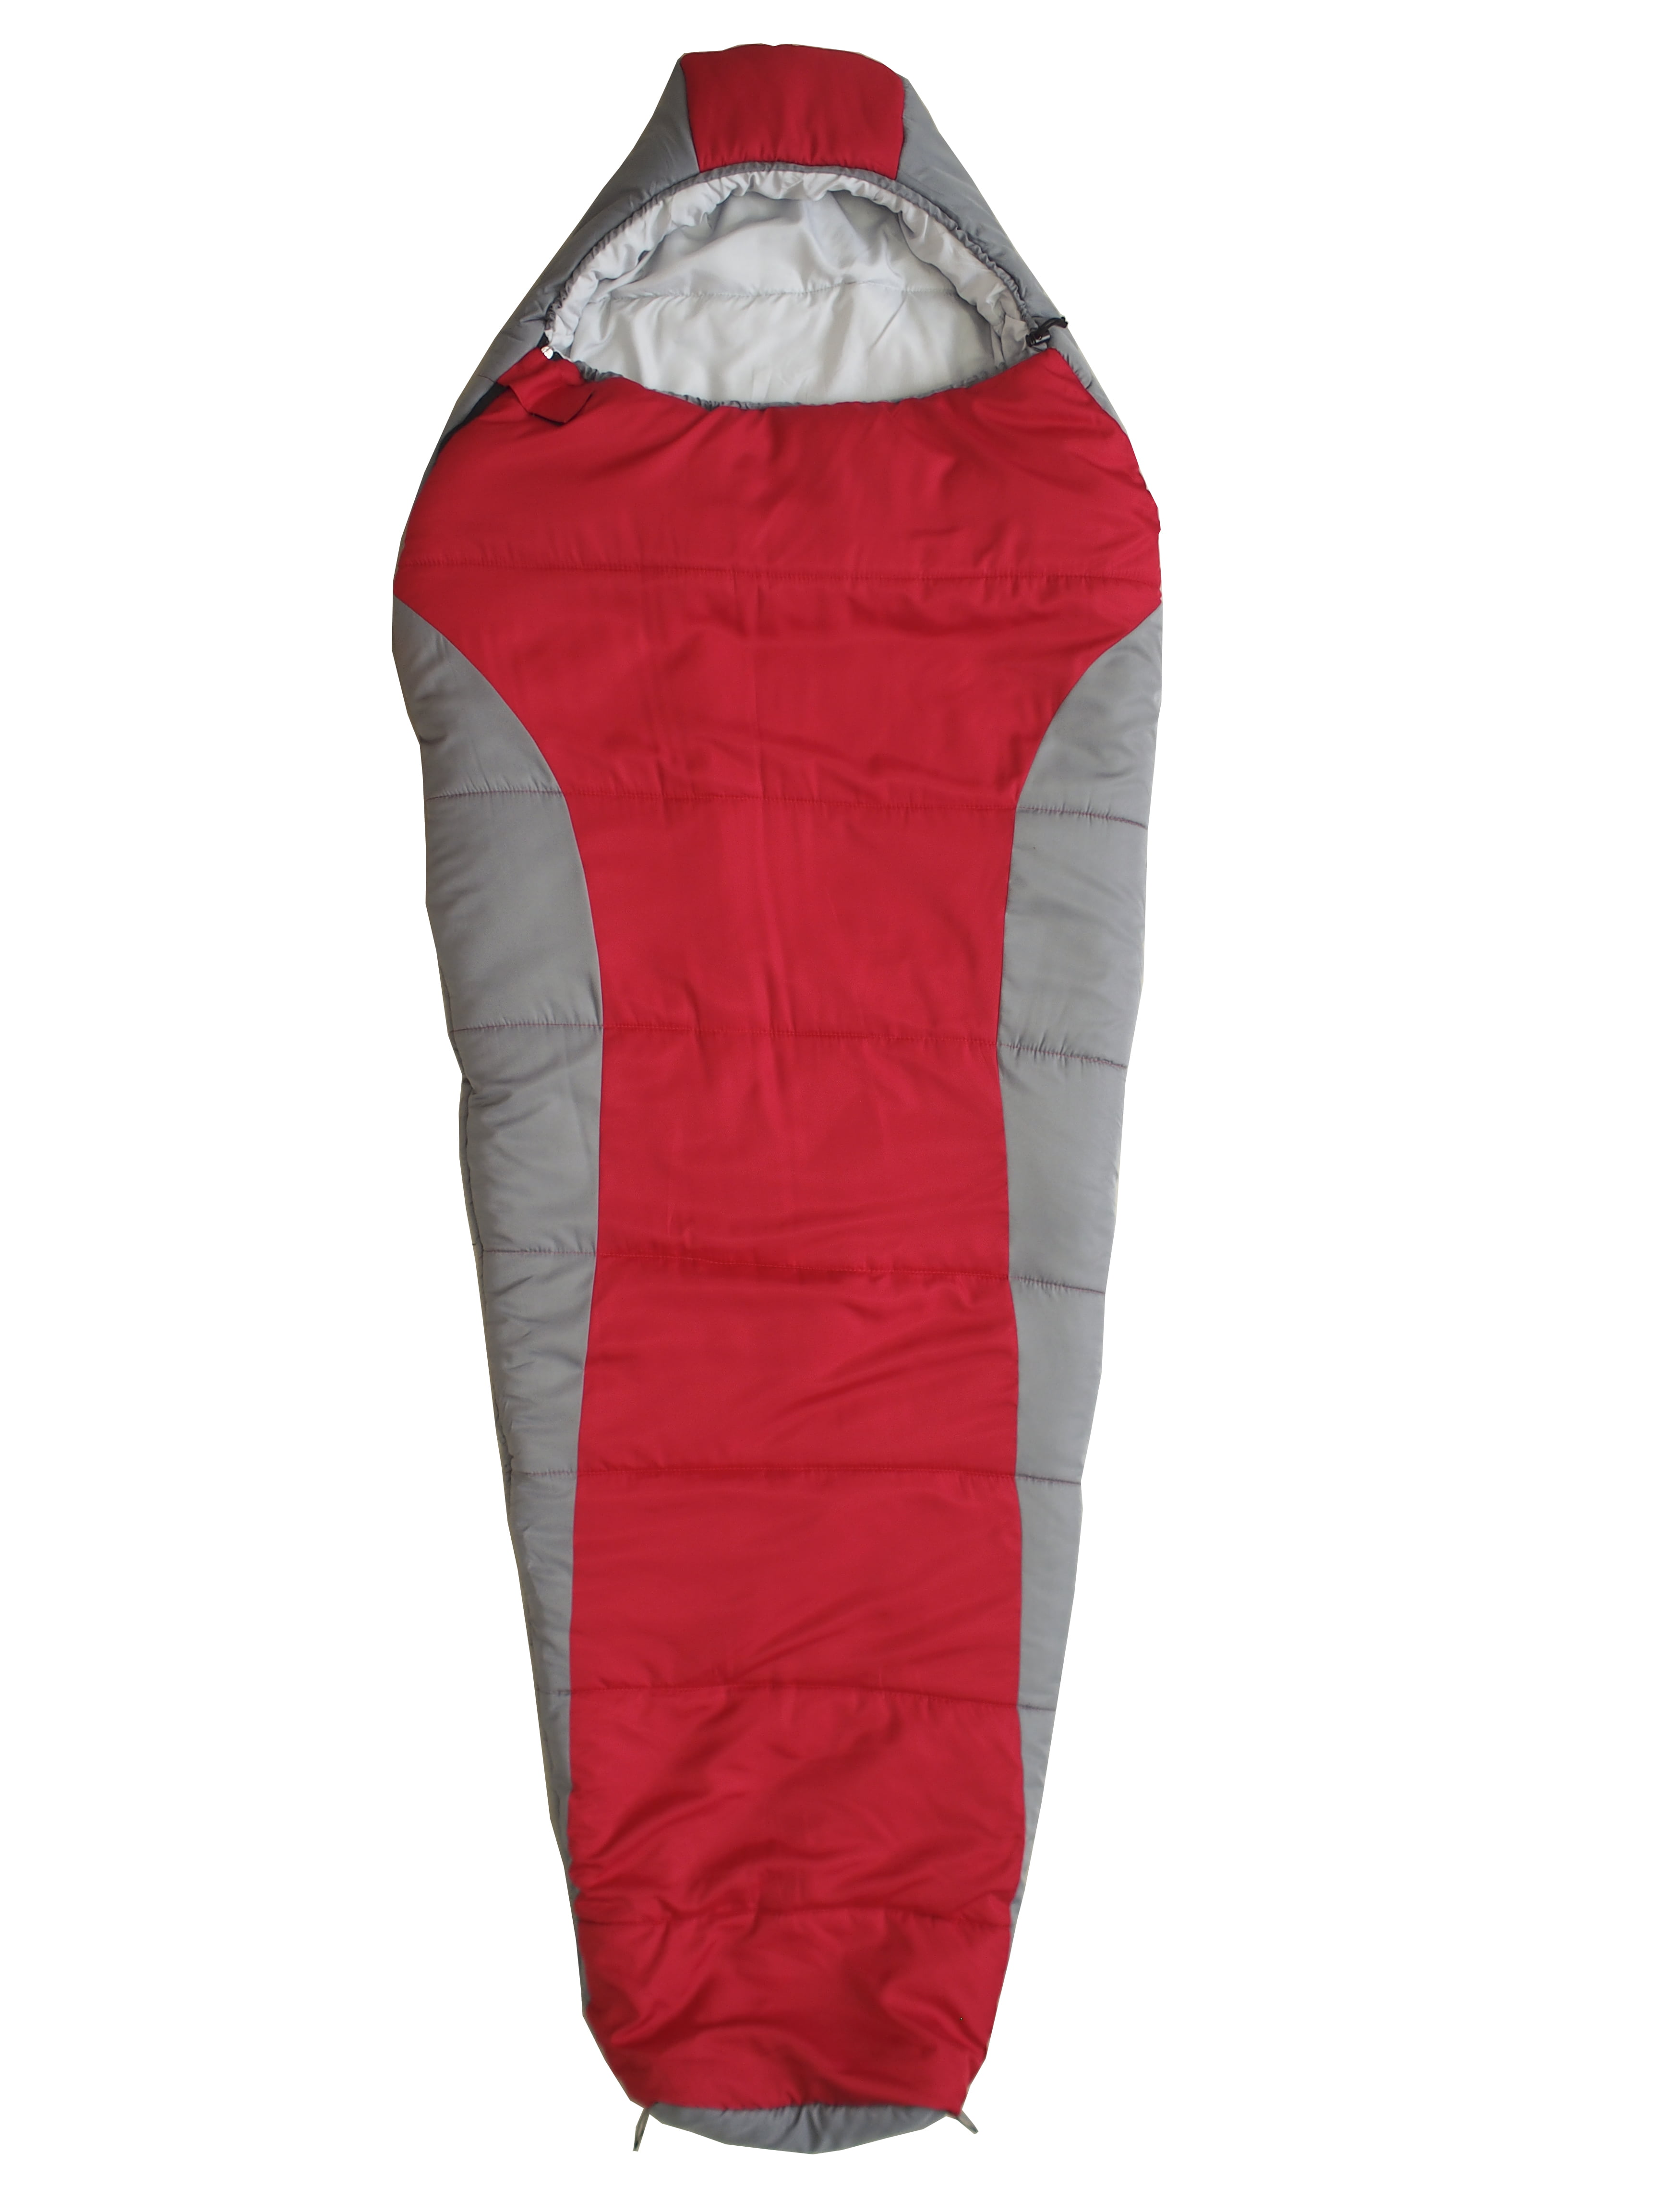 Red Mummy Sleeping Bag for Preppers